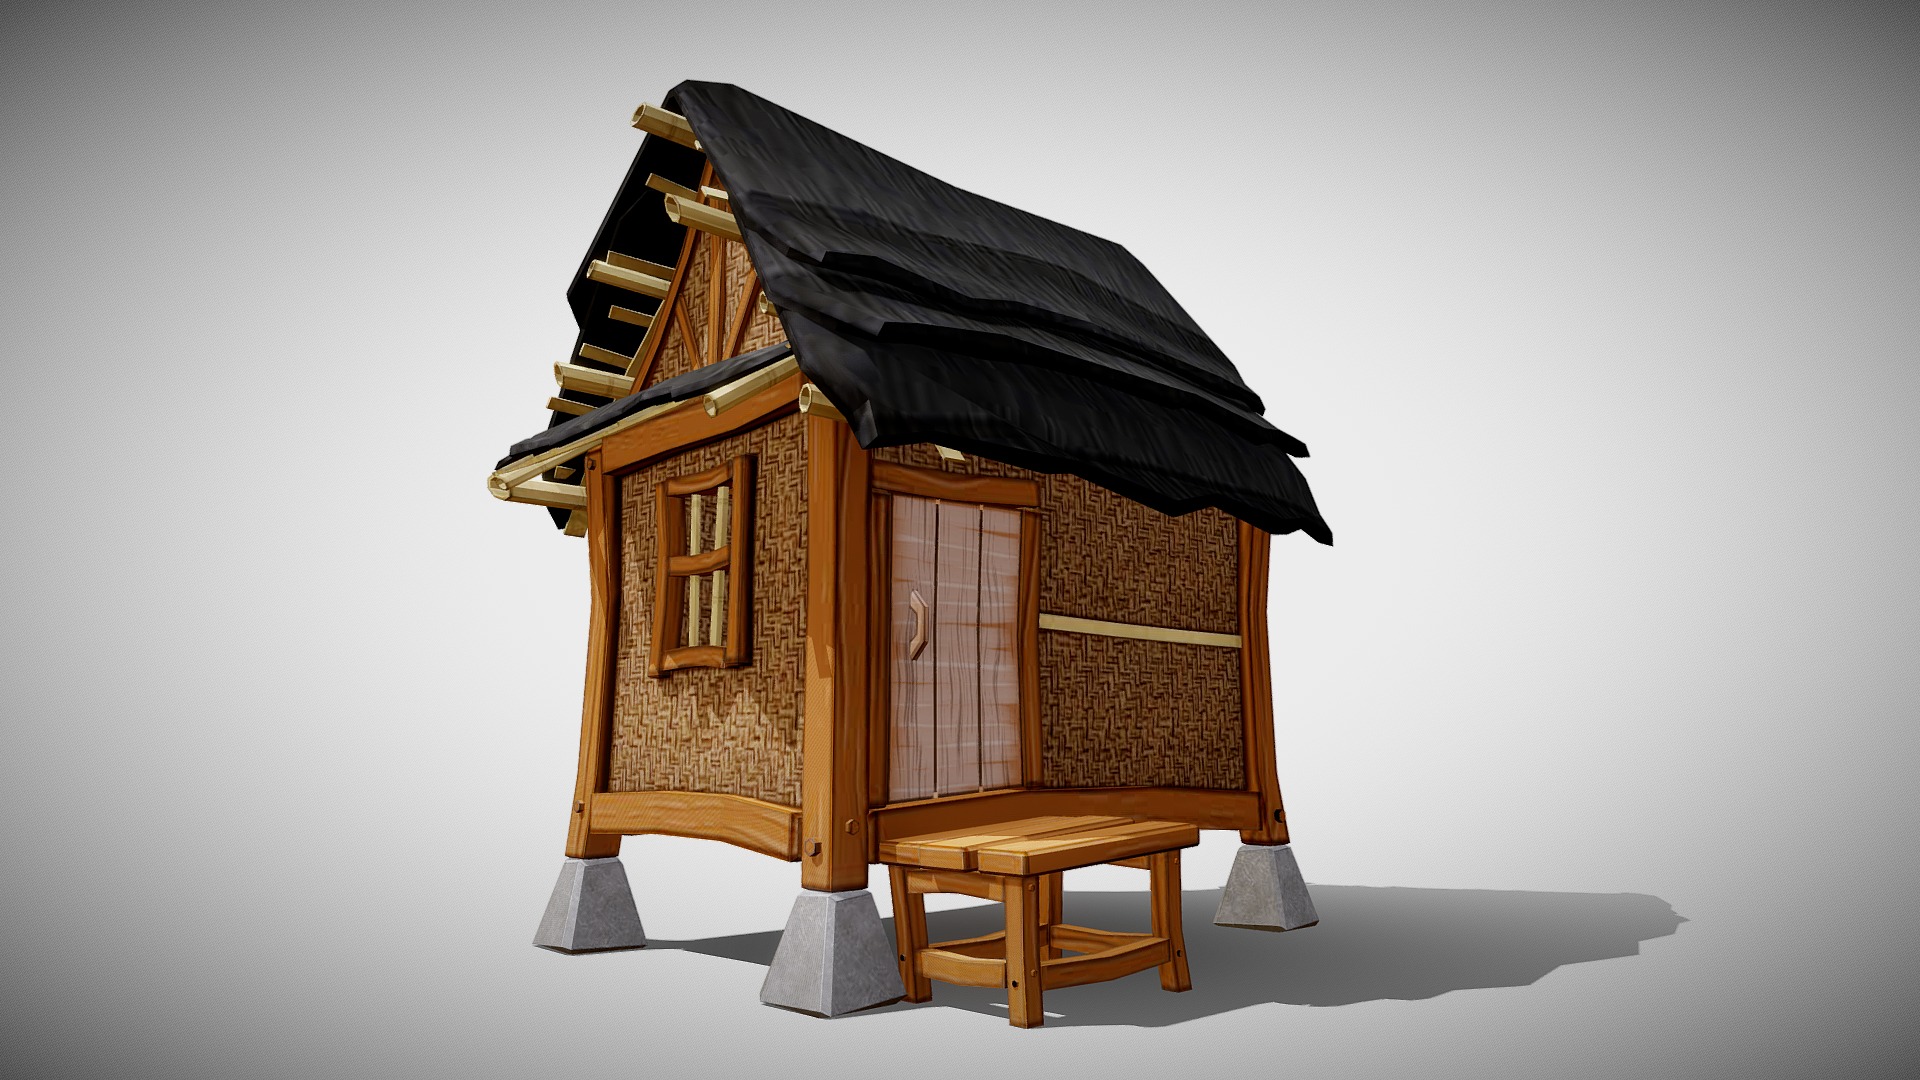 3D model Low Poly House ‘Julang Ngapak’ - This is a 3D model of the Low Poly House 'Julang Ngapak'. The 3D model is about a wooden house with a black umbrella.